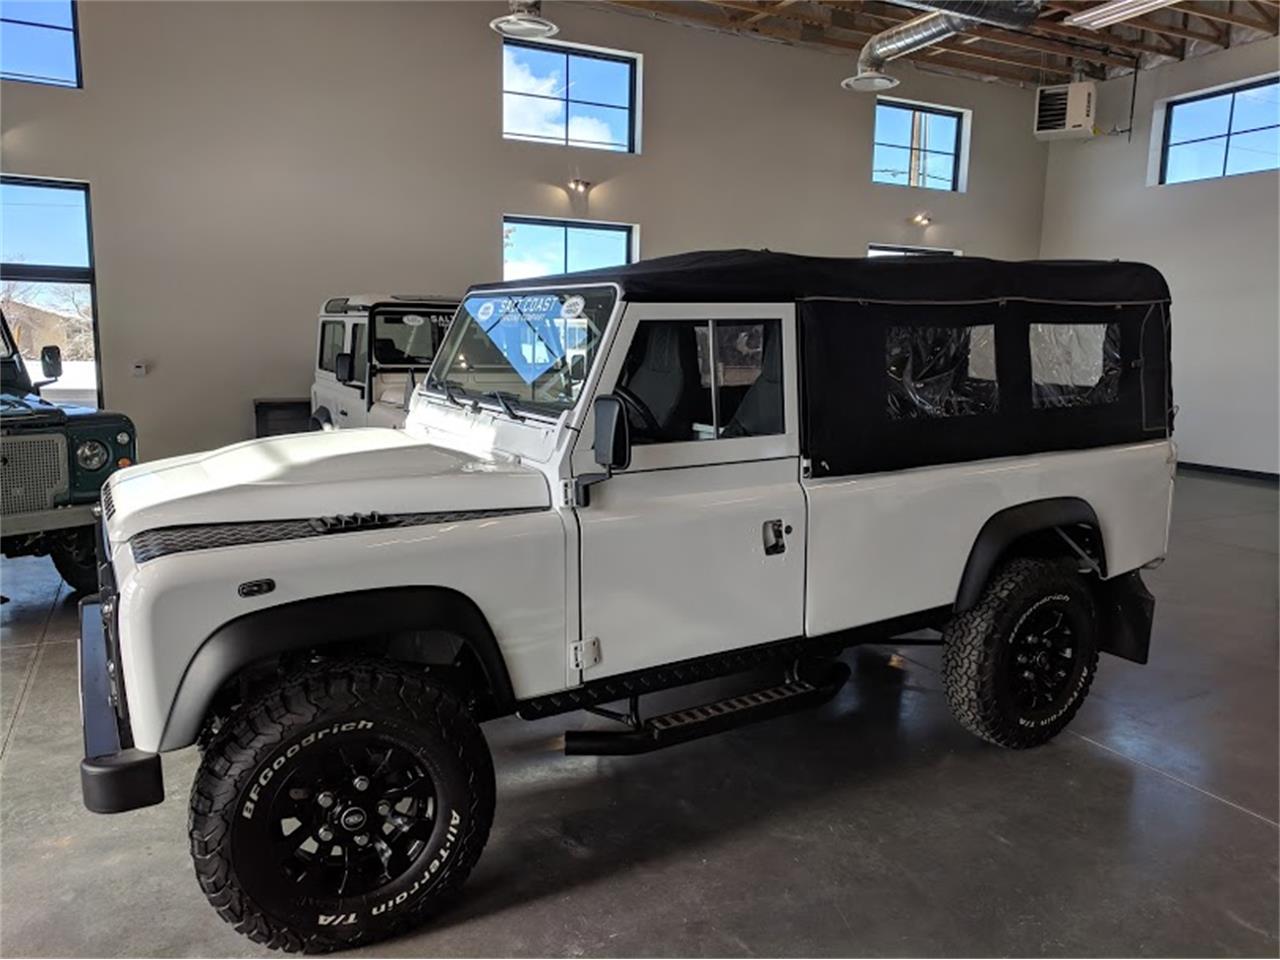 For Sale at Auction: 1990 Land Rover Defender for sale in Billings, MT